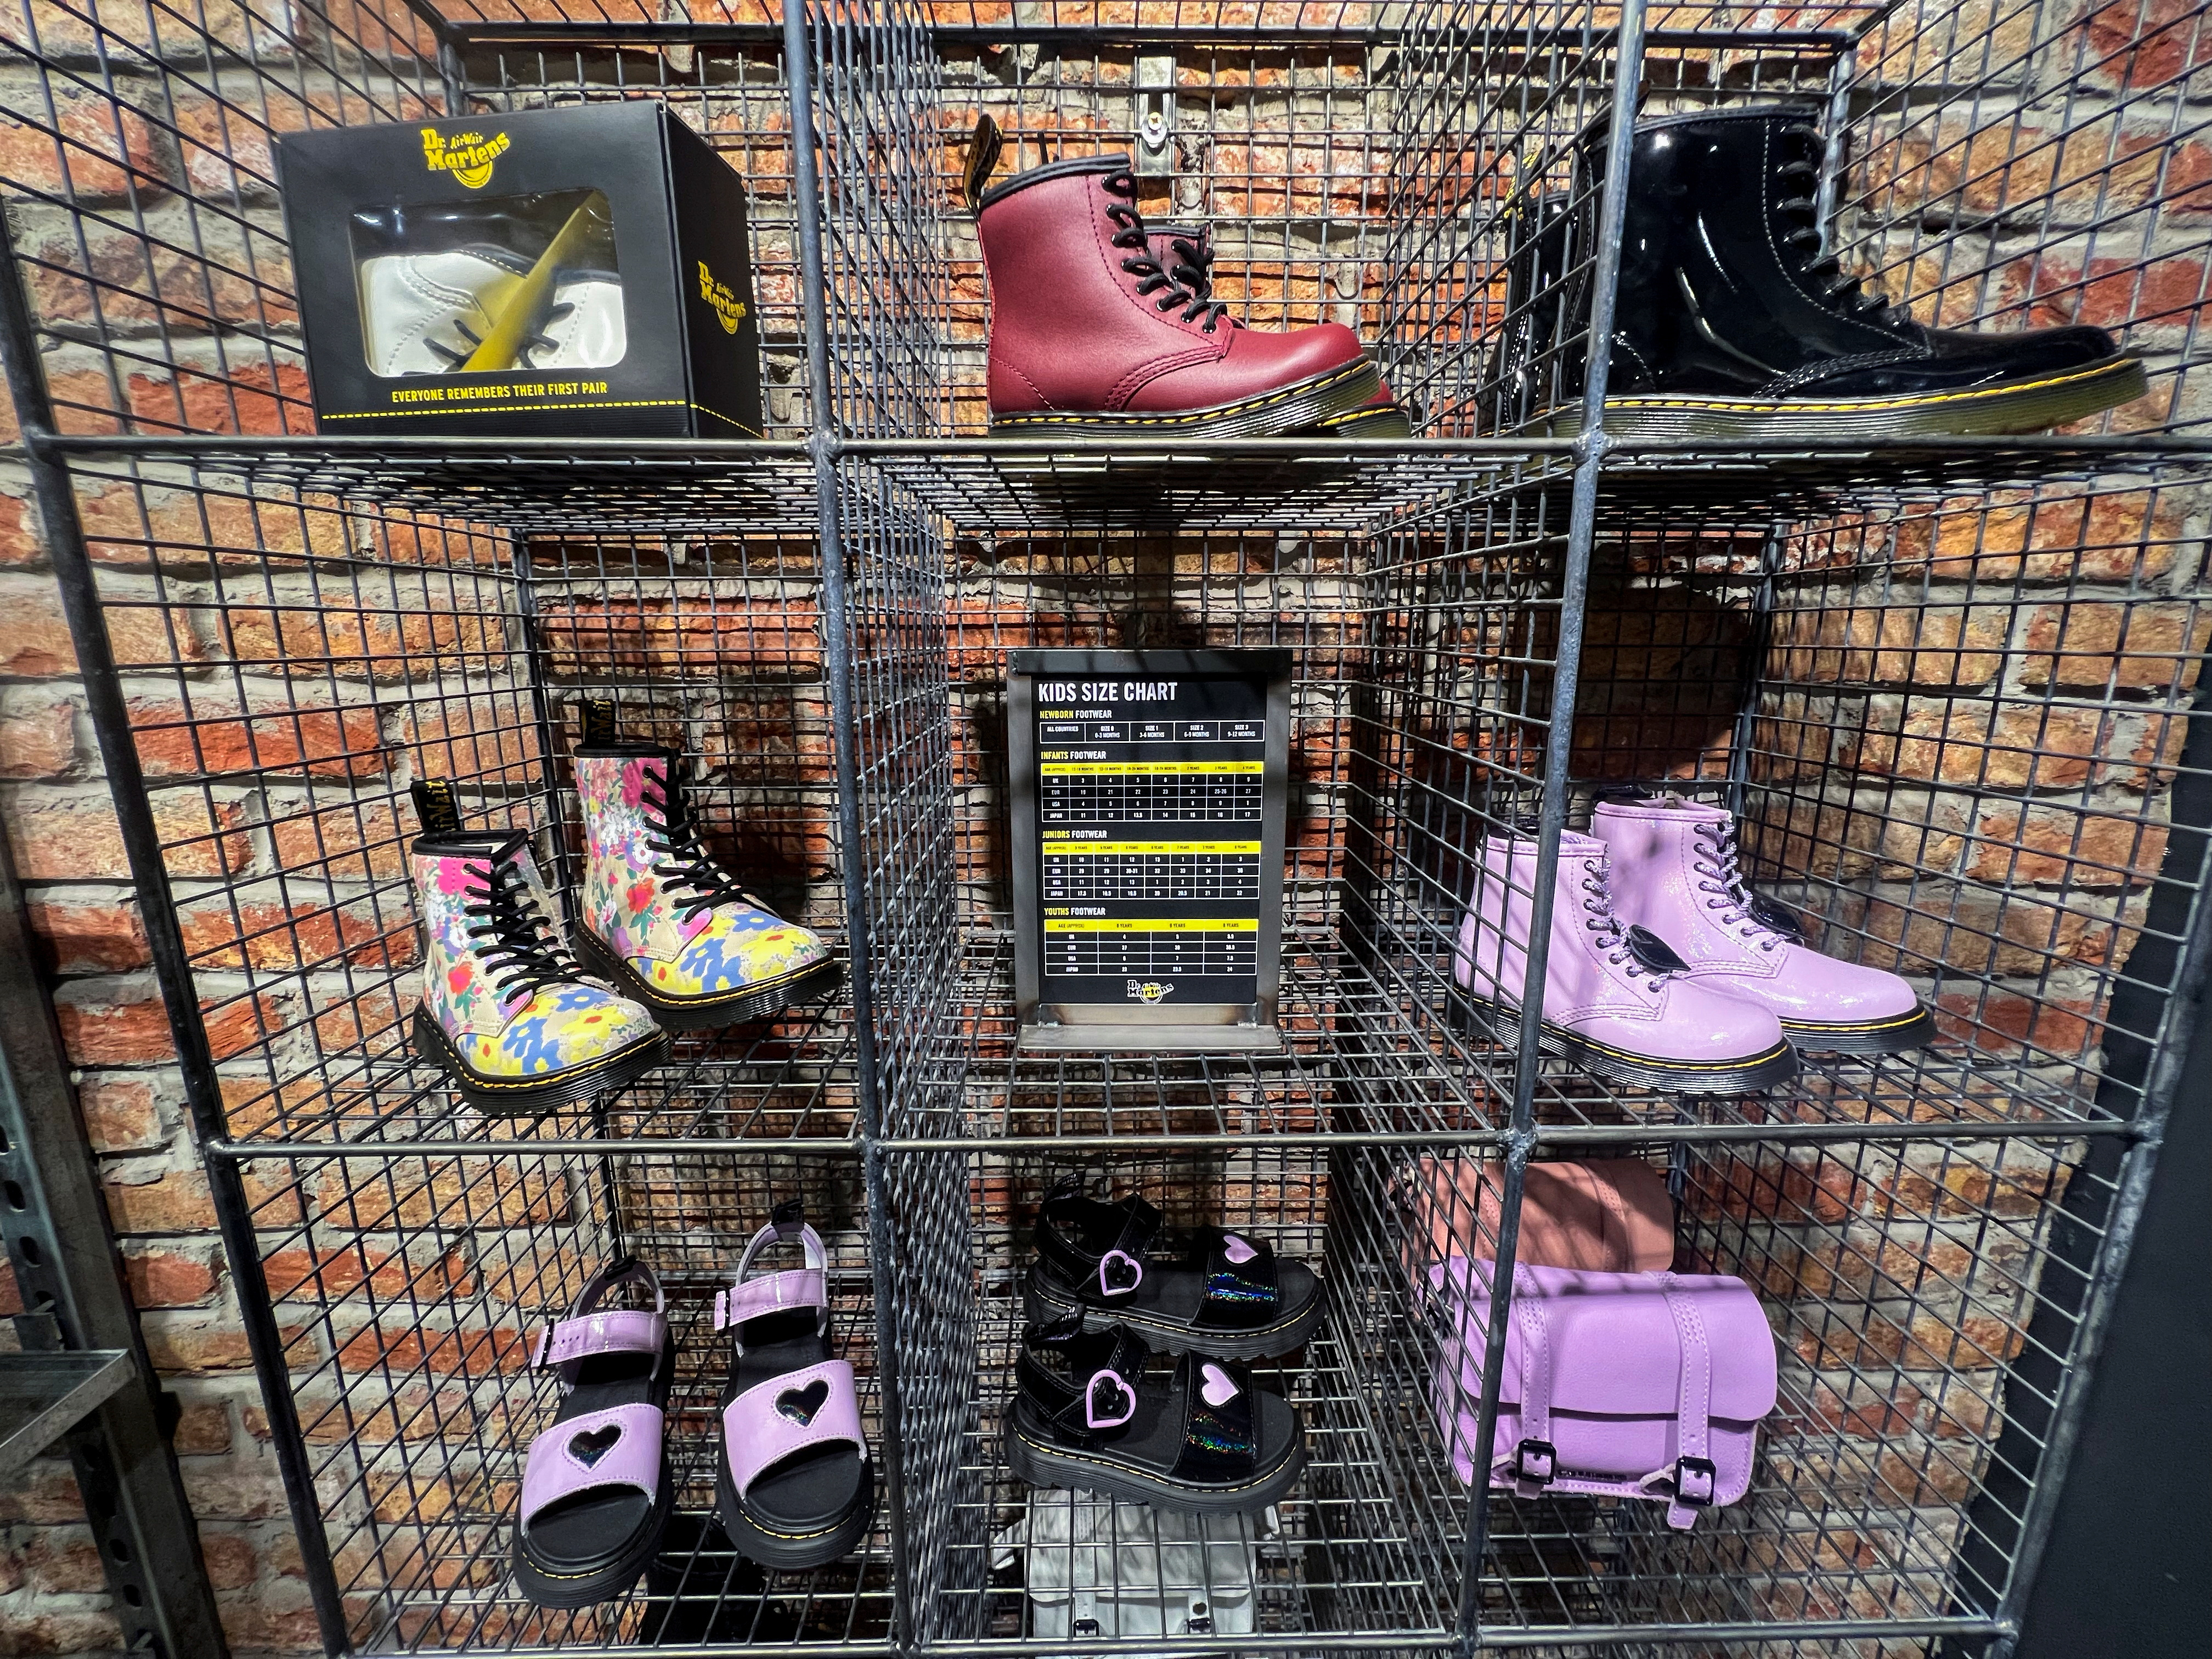 Dr. Martens shoes are displayed inside a shop in Manchester